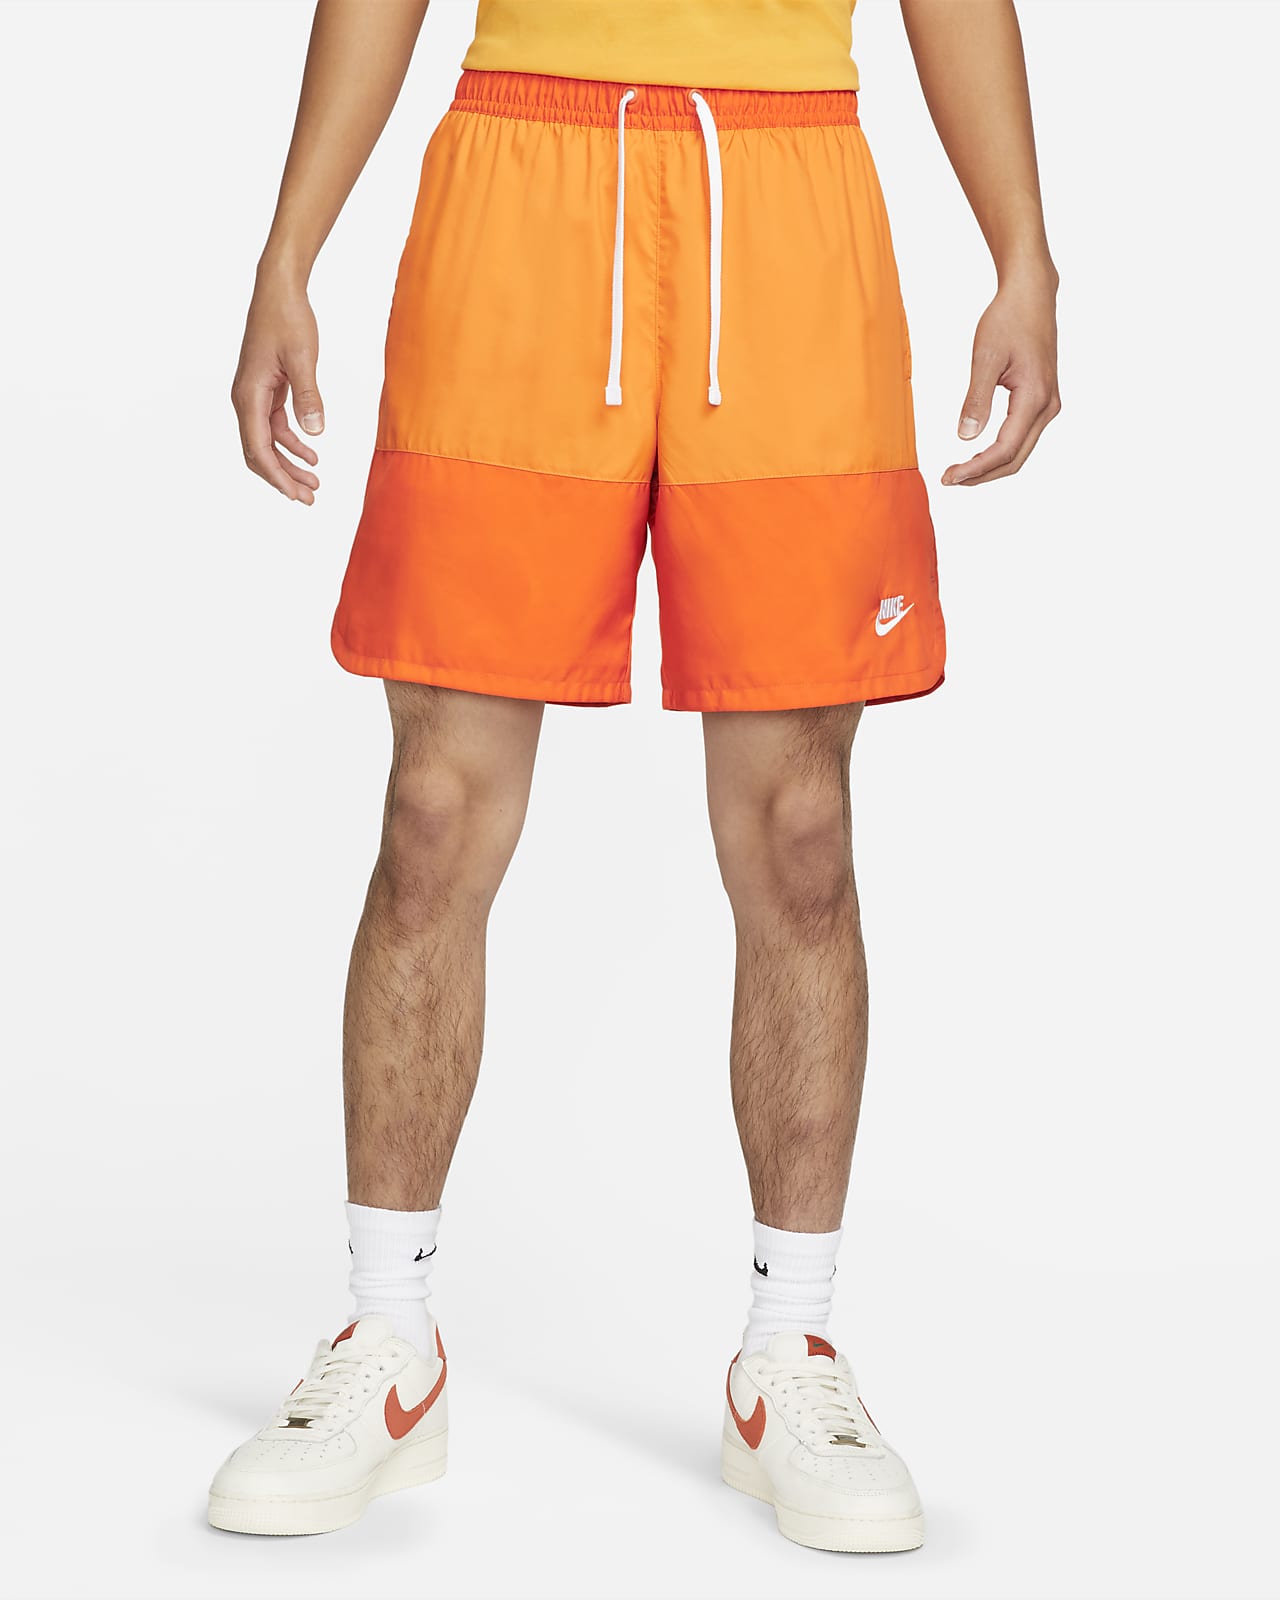 Nike Sport Essential Men's Woven Lined Shorts Nike .com